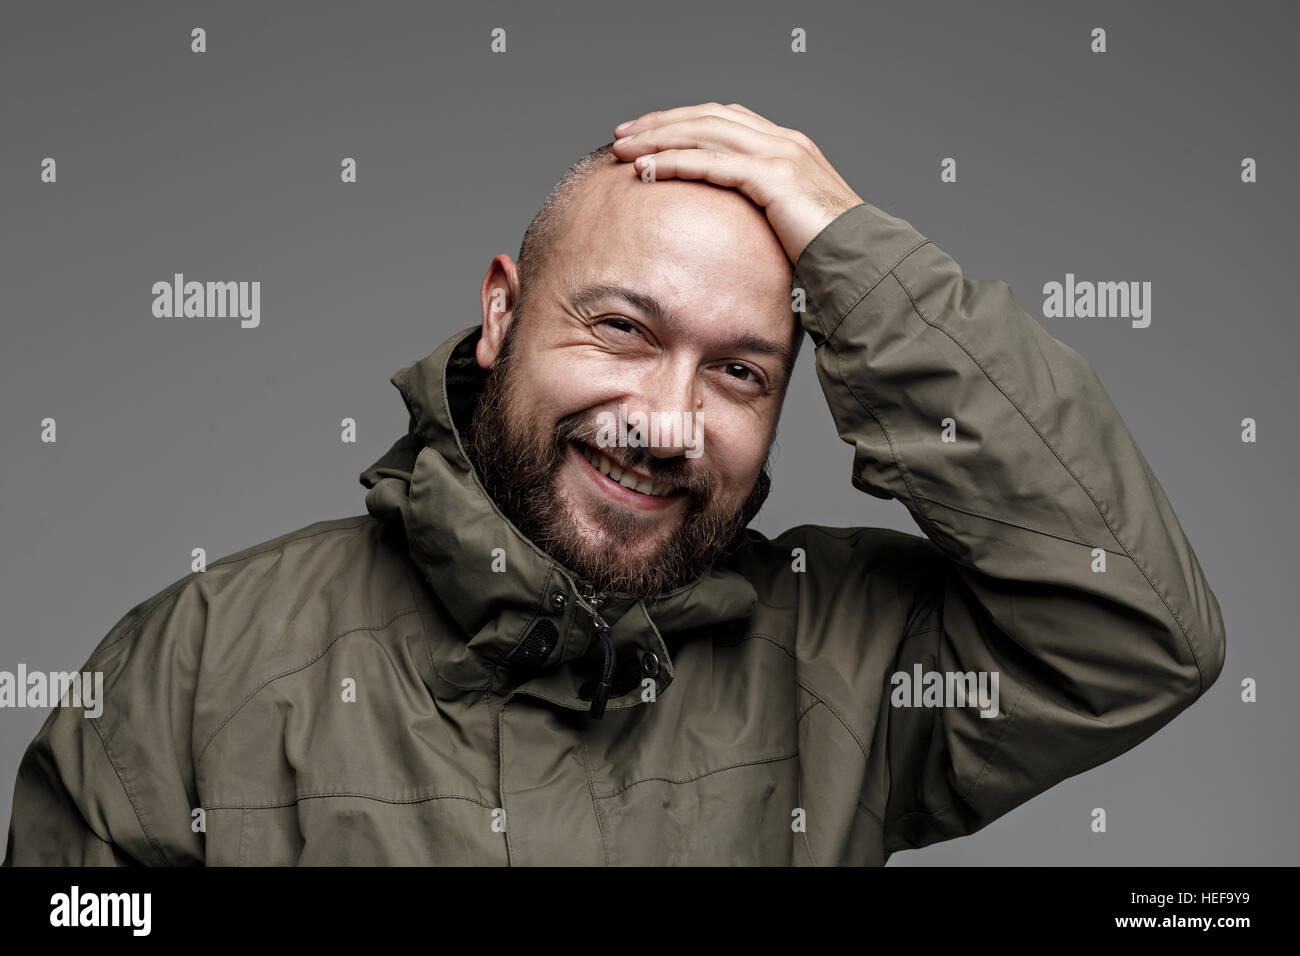 fear,male,portrait,man,shock,face,white,open,mouth,bald,background,isolated,handsome,scream,head,displeased,young,afraid,panic Stock Photo